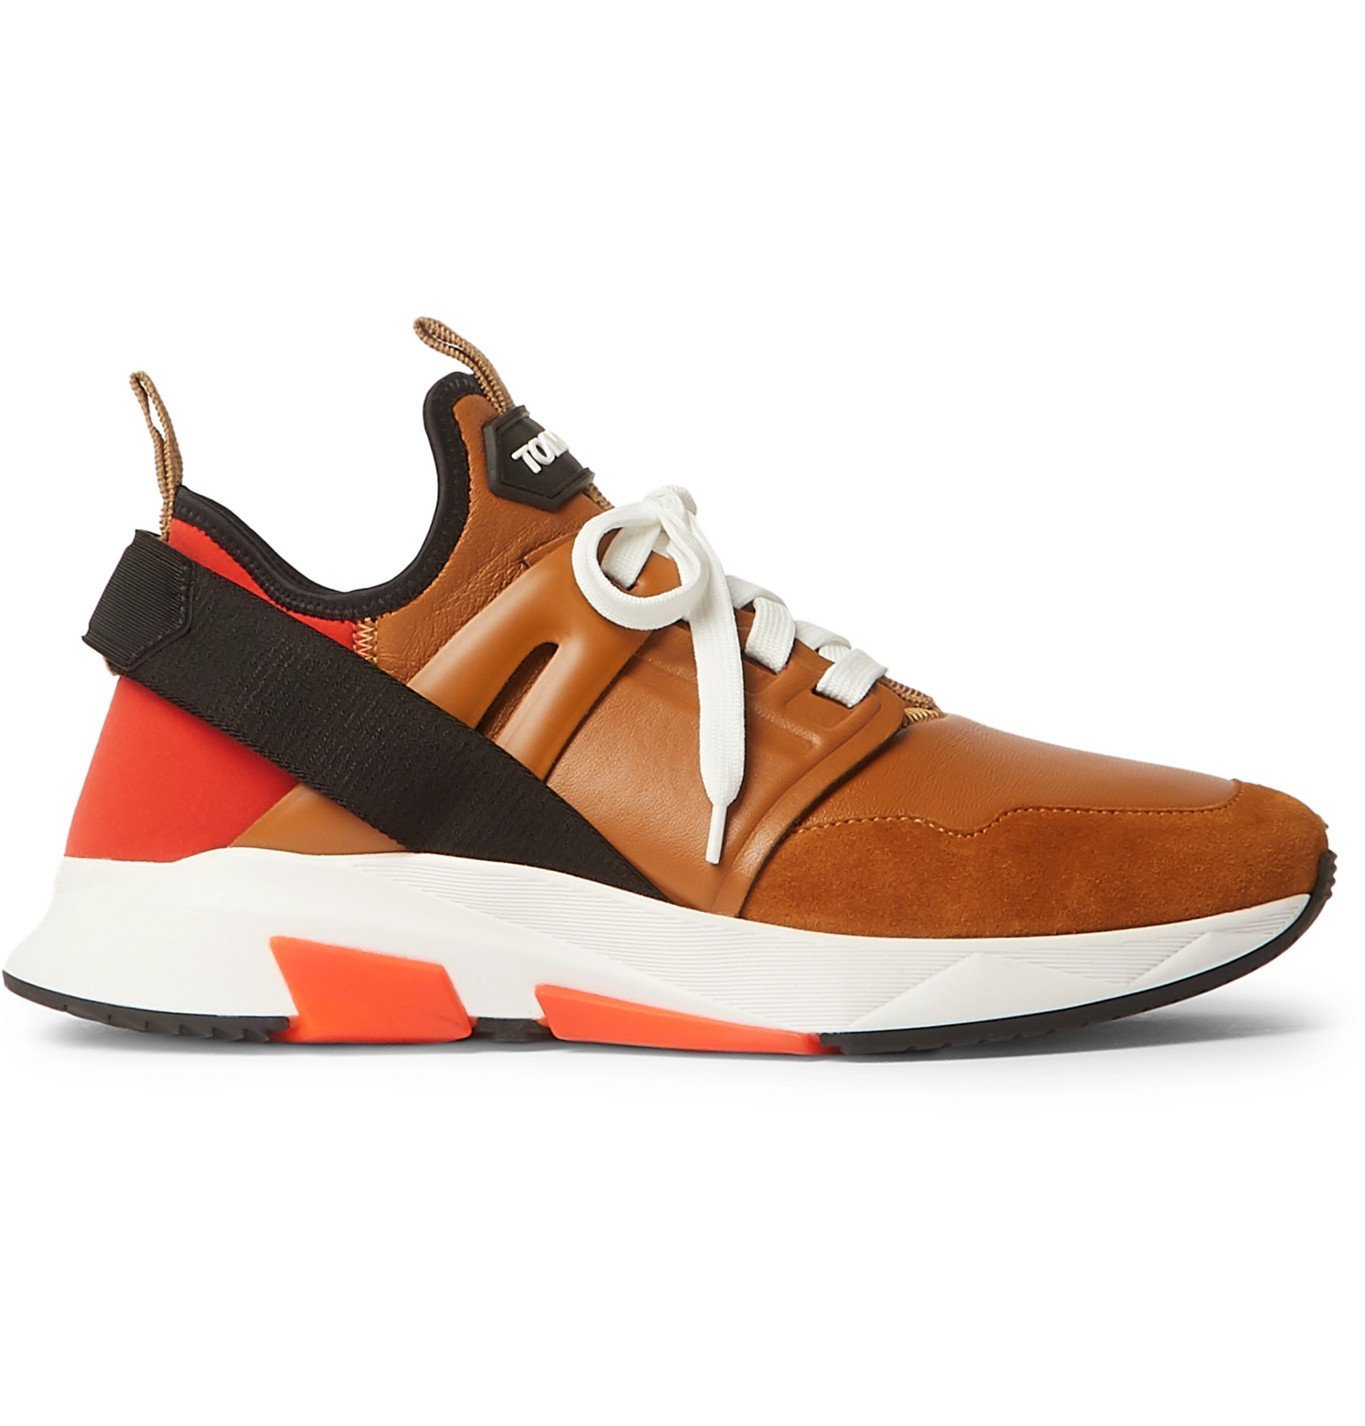 TOM FORD - Jago Neoprene, Suede and Leather Sneakers - Brown TOM FORD